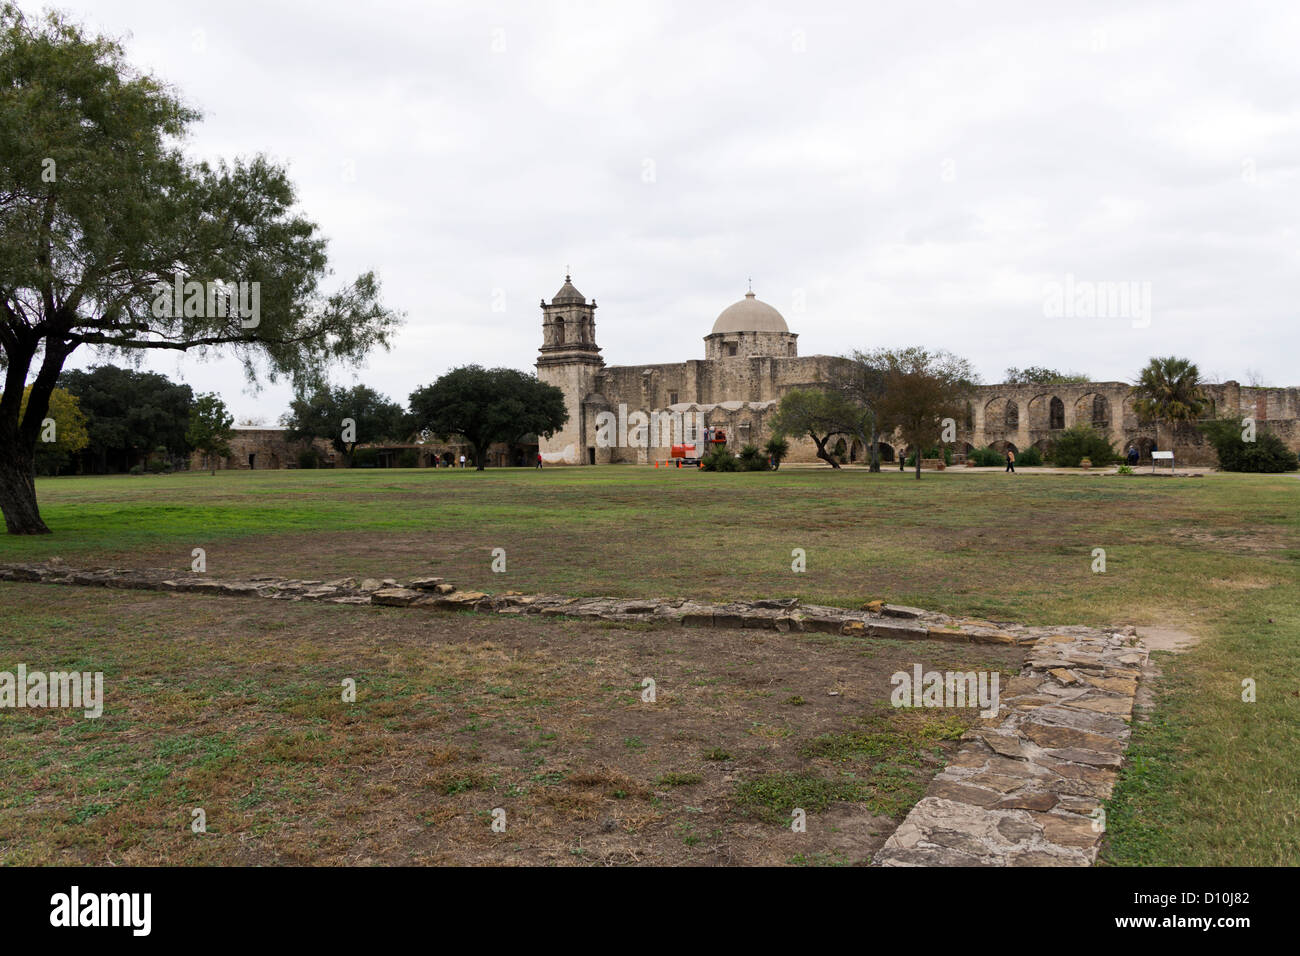 Mission San Jose', Queen of the missions, with the church and Romanesque arched cloisters in the background. Stock Photo